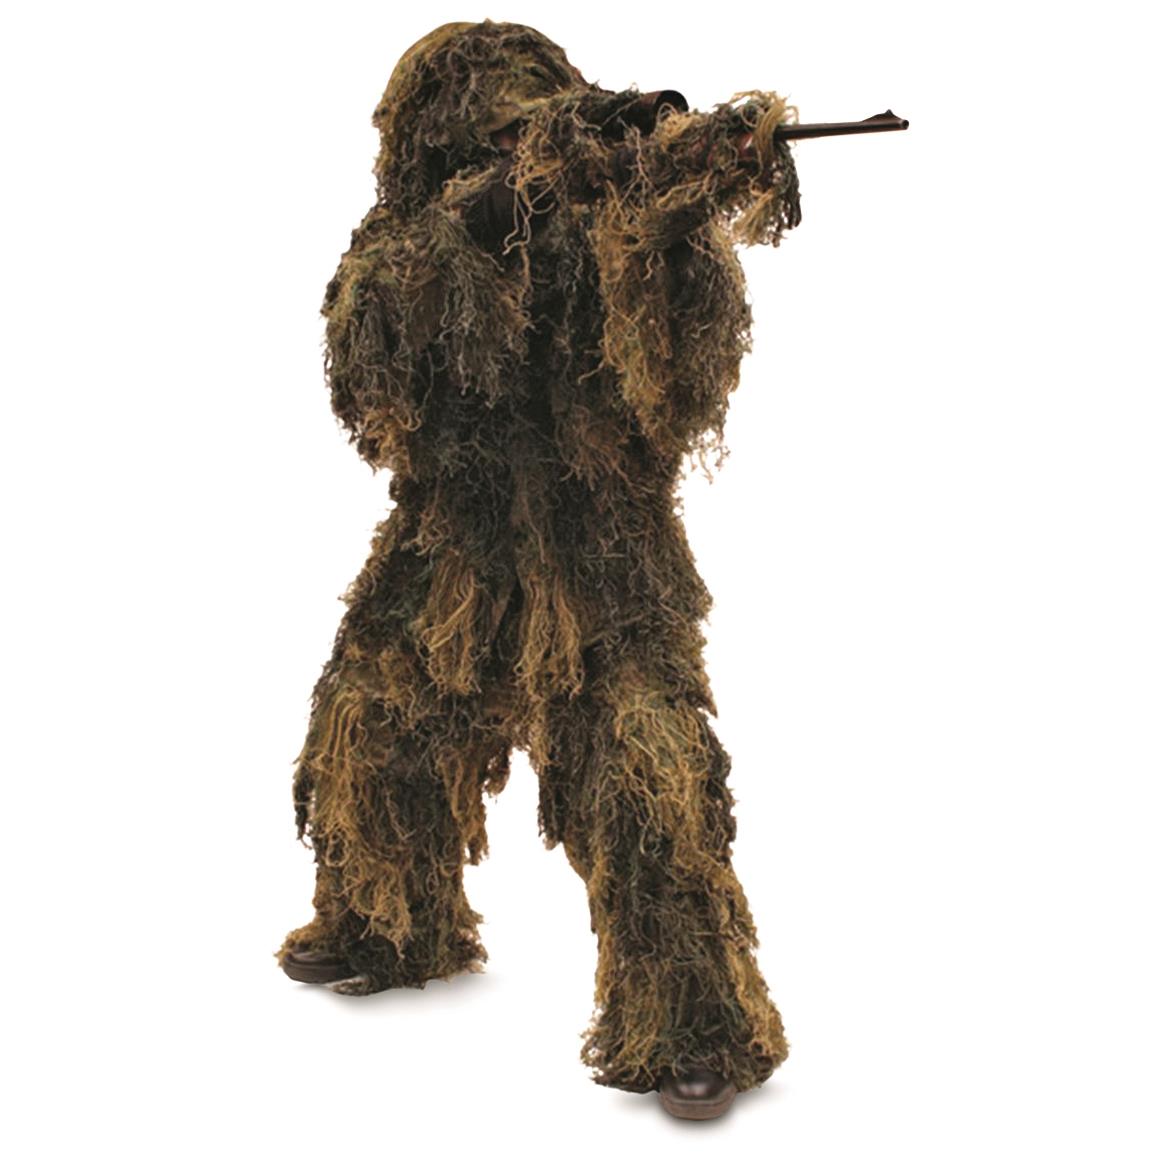 Red Rock Outdoor Gear Youth Ghillie Suit, Woodland